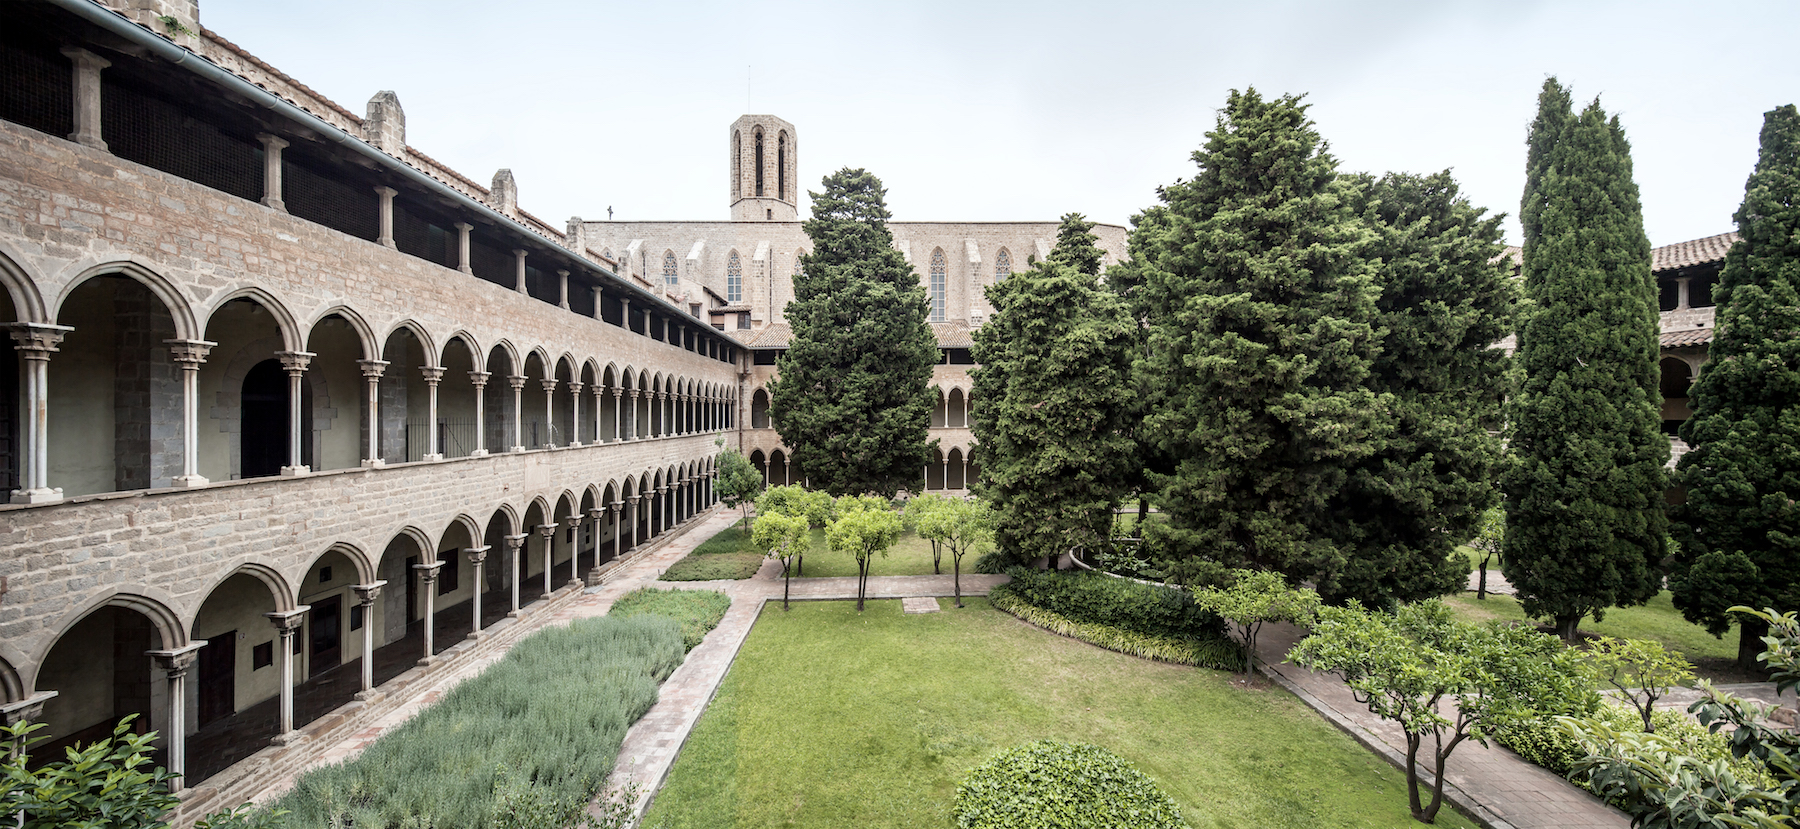 VIRTUAL RECONSTRUCTION OF THE ROYAL FEMALE MONASTERY OF ST. MARY OF PEDRALBES